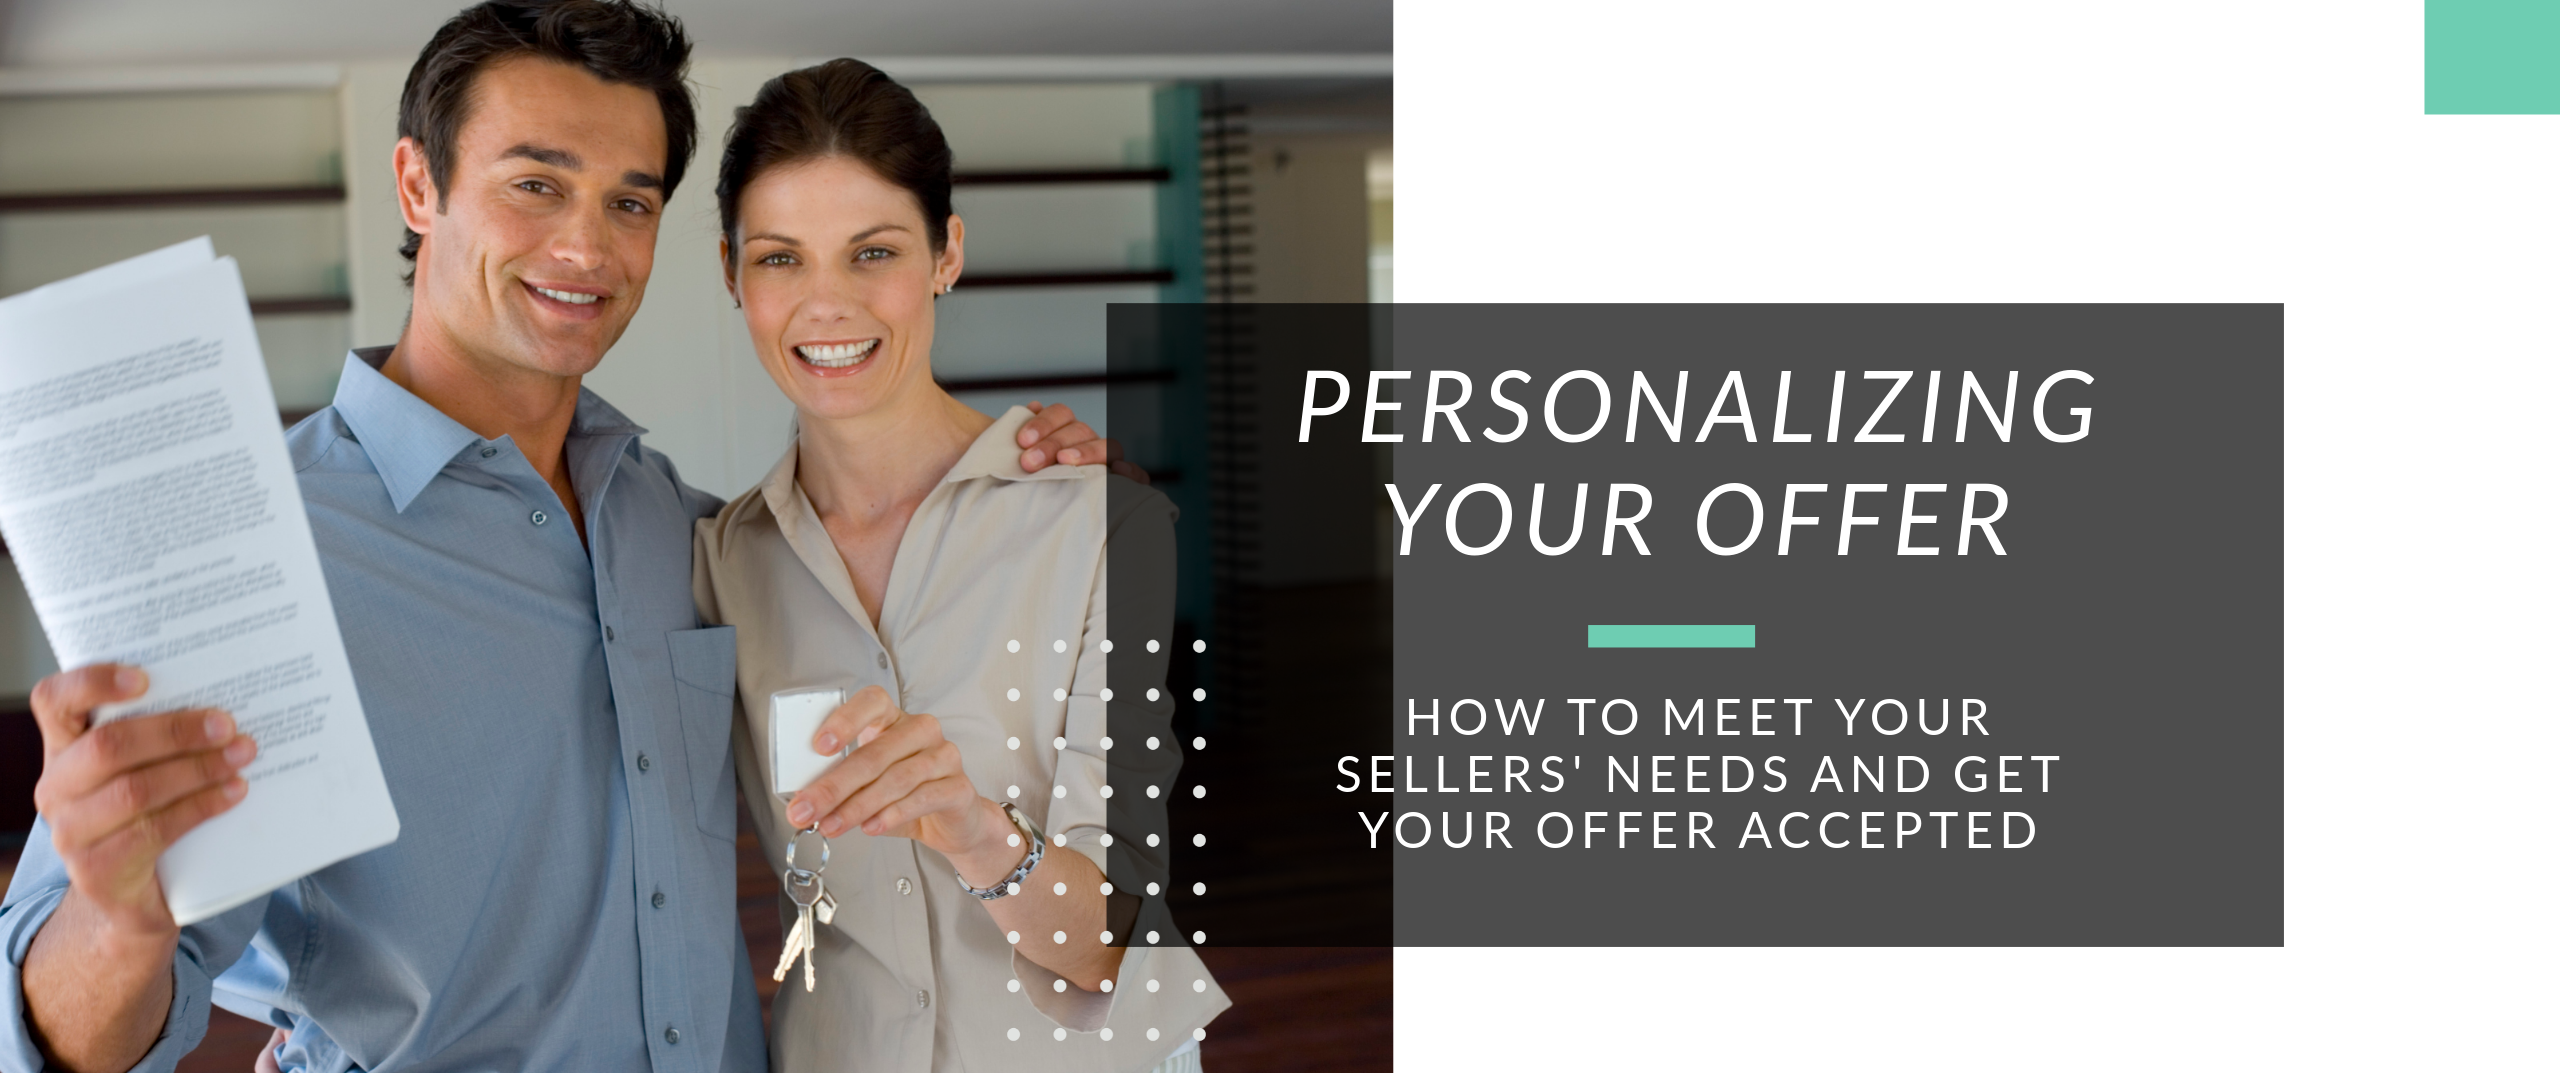 Tips to Make Your Real Estate Offer Stand Out - Part 3: Personalizing Your Offer